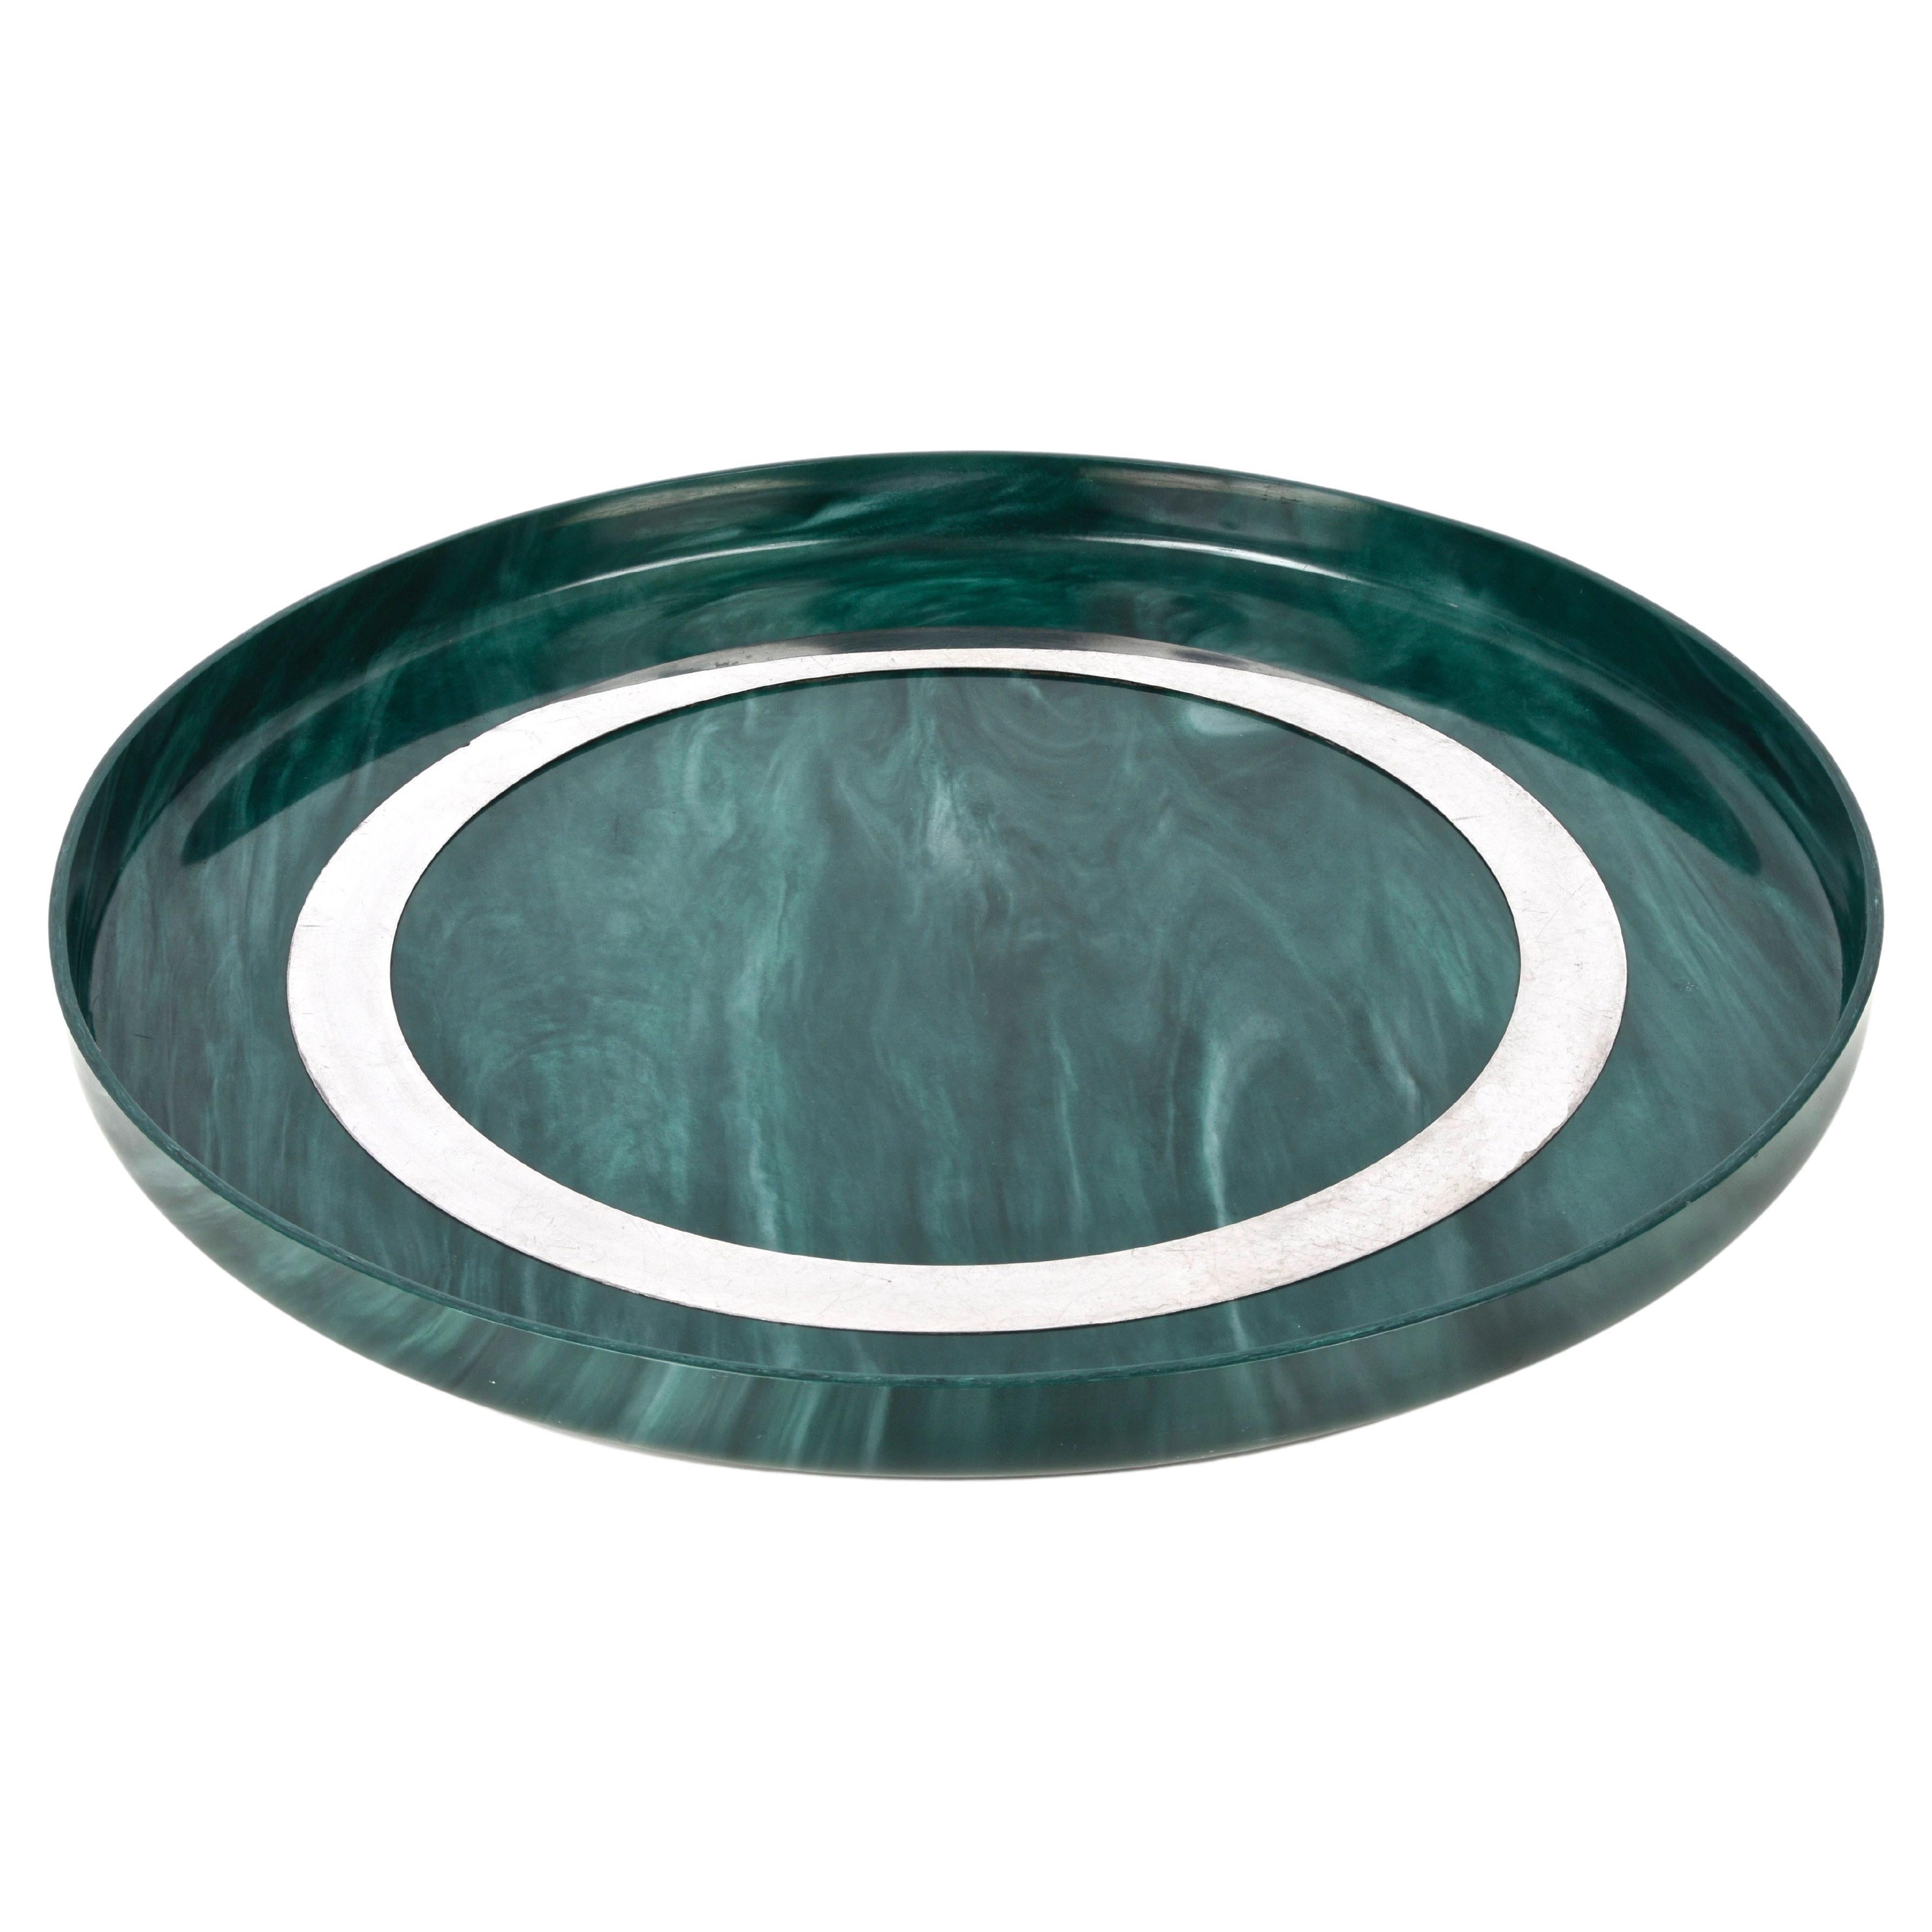 Midcentury Large Round GreenBakelite and Steel Italian Round Serving Tray, 1980s For Sale